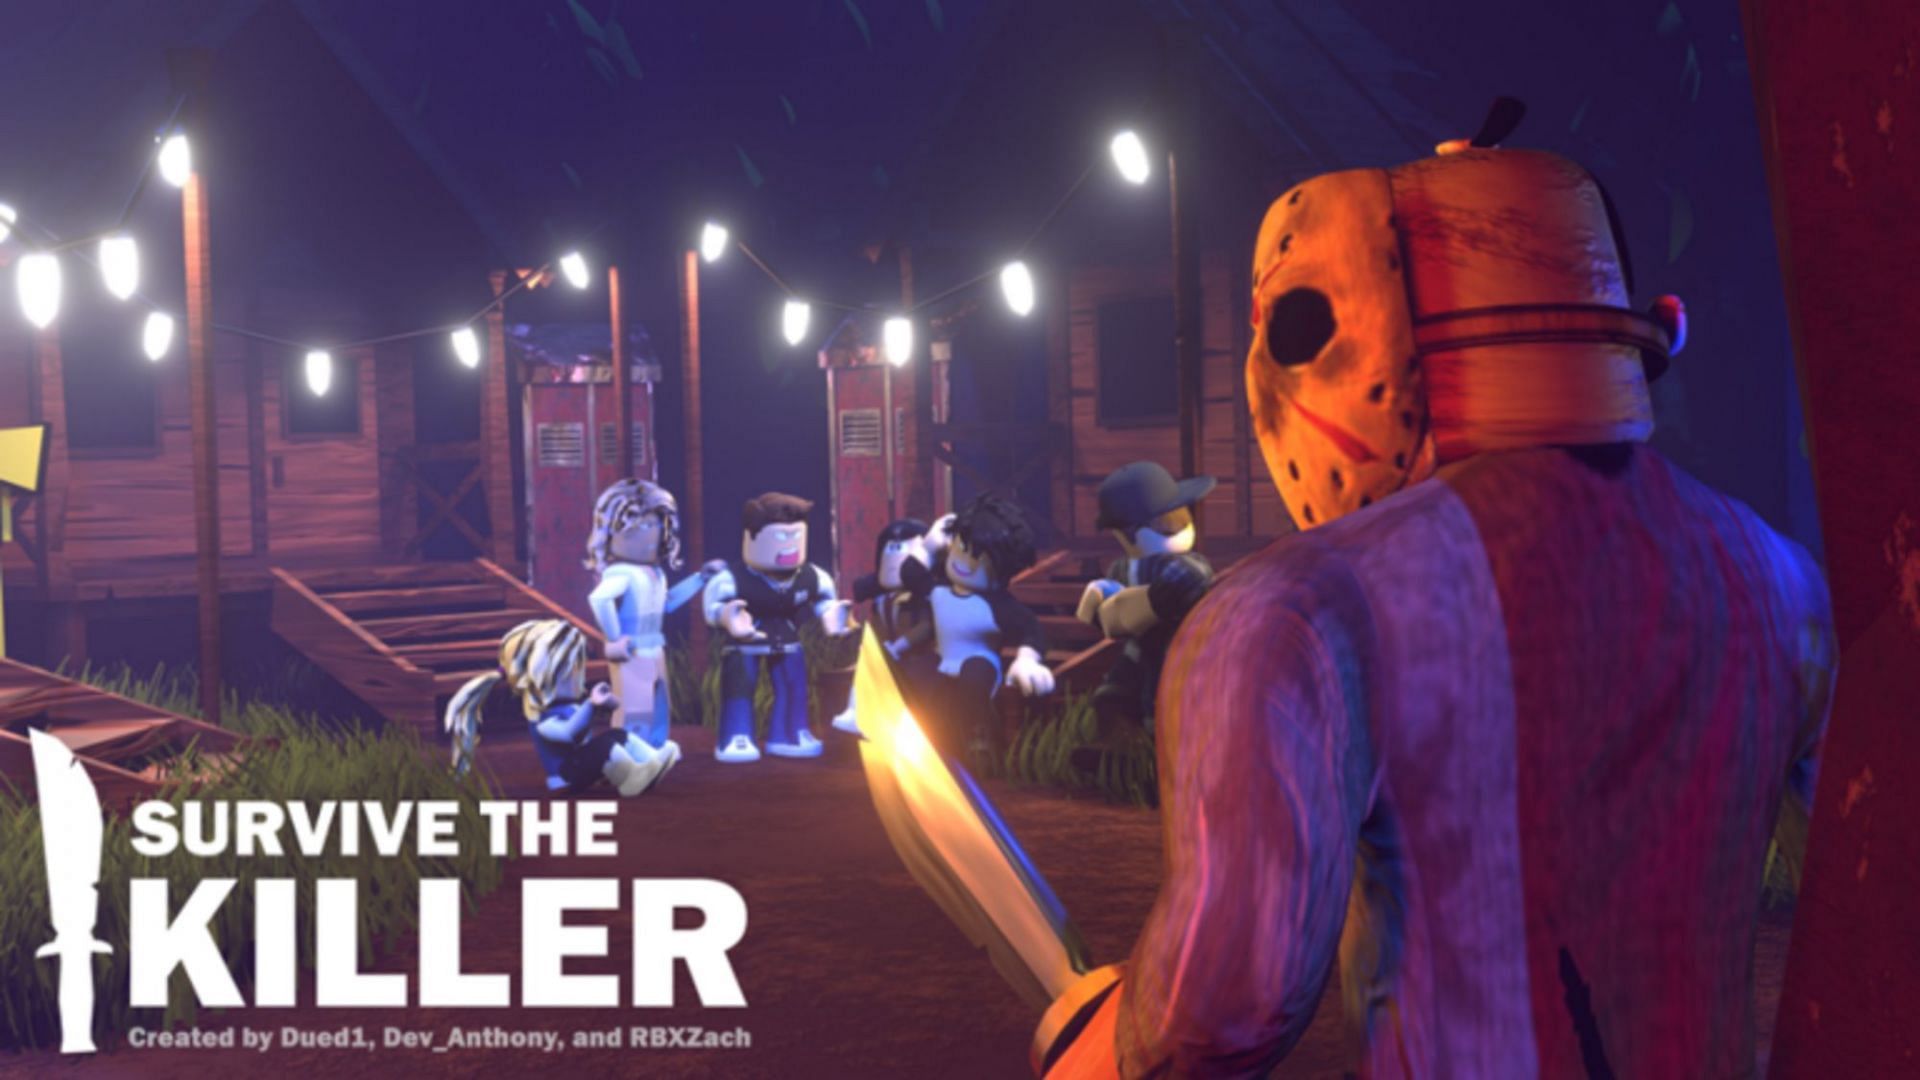 Survive the Killer depicts a tranquil night gone bad. (Image via Roblox)